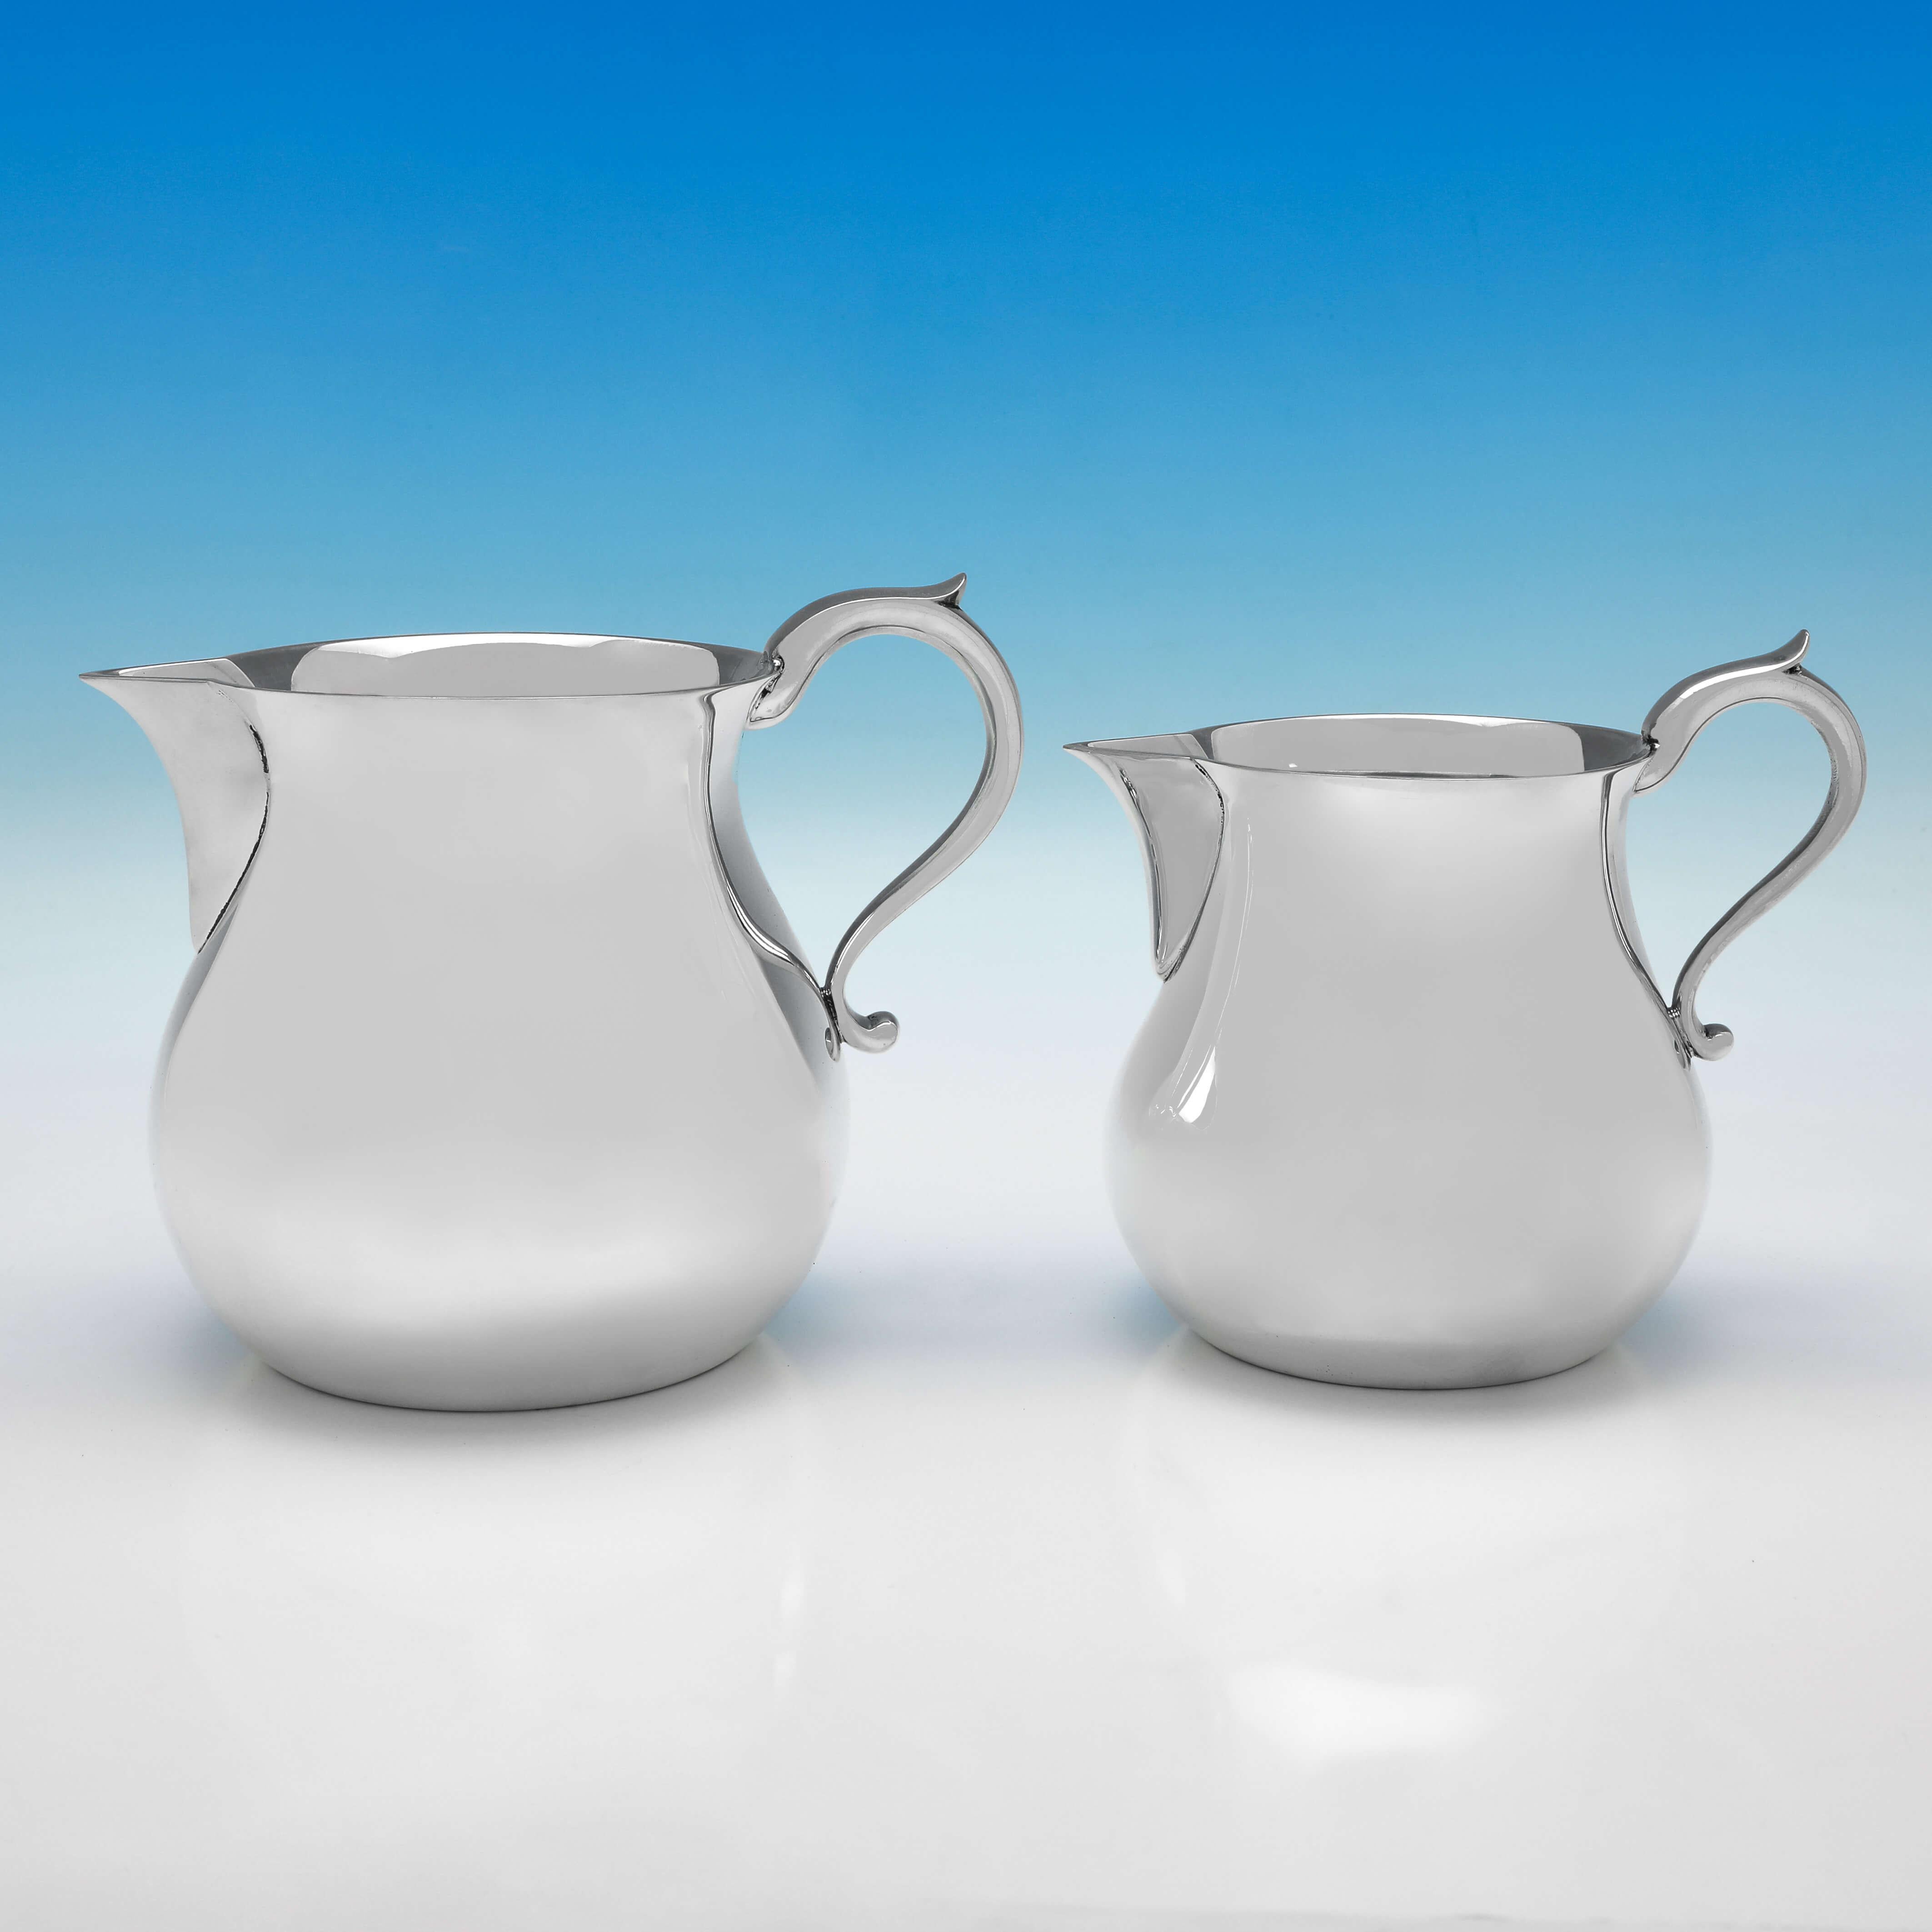 Hallmarked in London in 1978 by Edward Barnard & Sons, this very handsome and rare set of 4 graduating Sterling Silver Jugs, are plain in style, with scroll handles. 

The largest jug measures 6.5